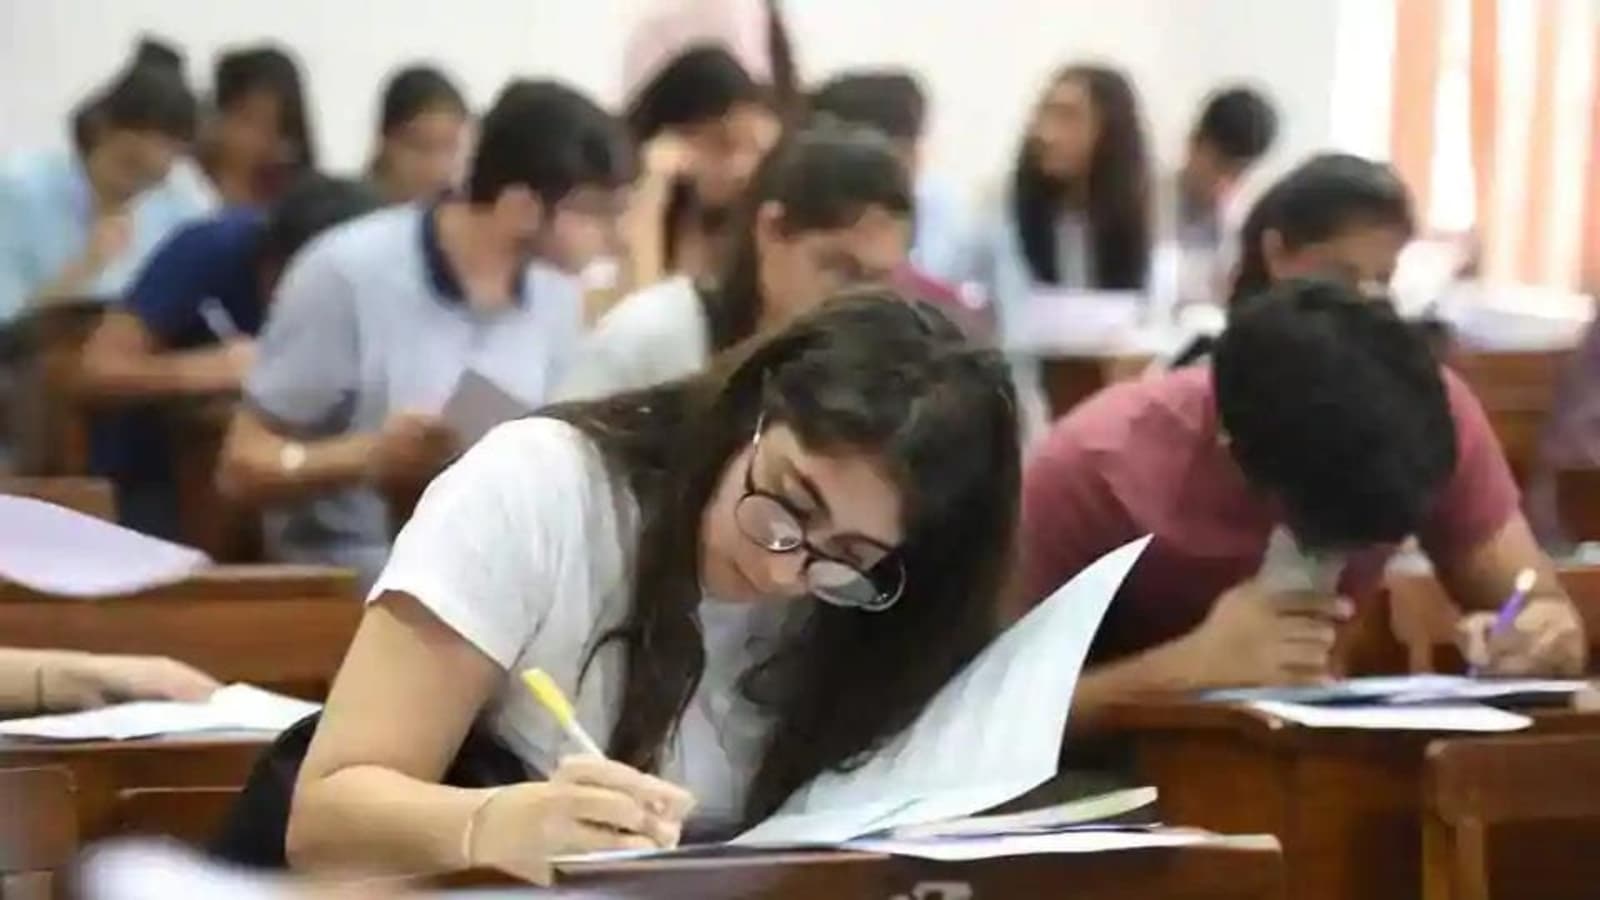 CLAT Registration: Top Law colleges in India in 2022